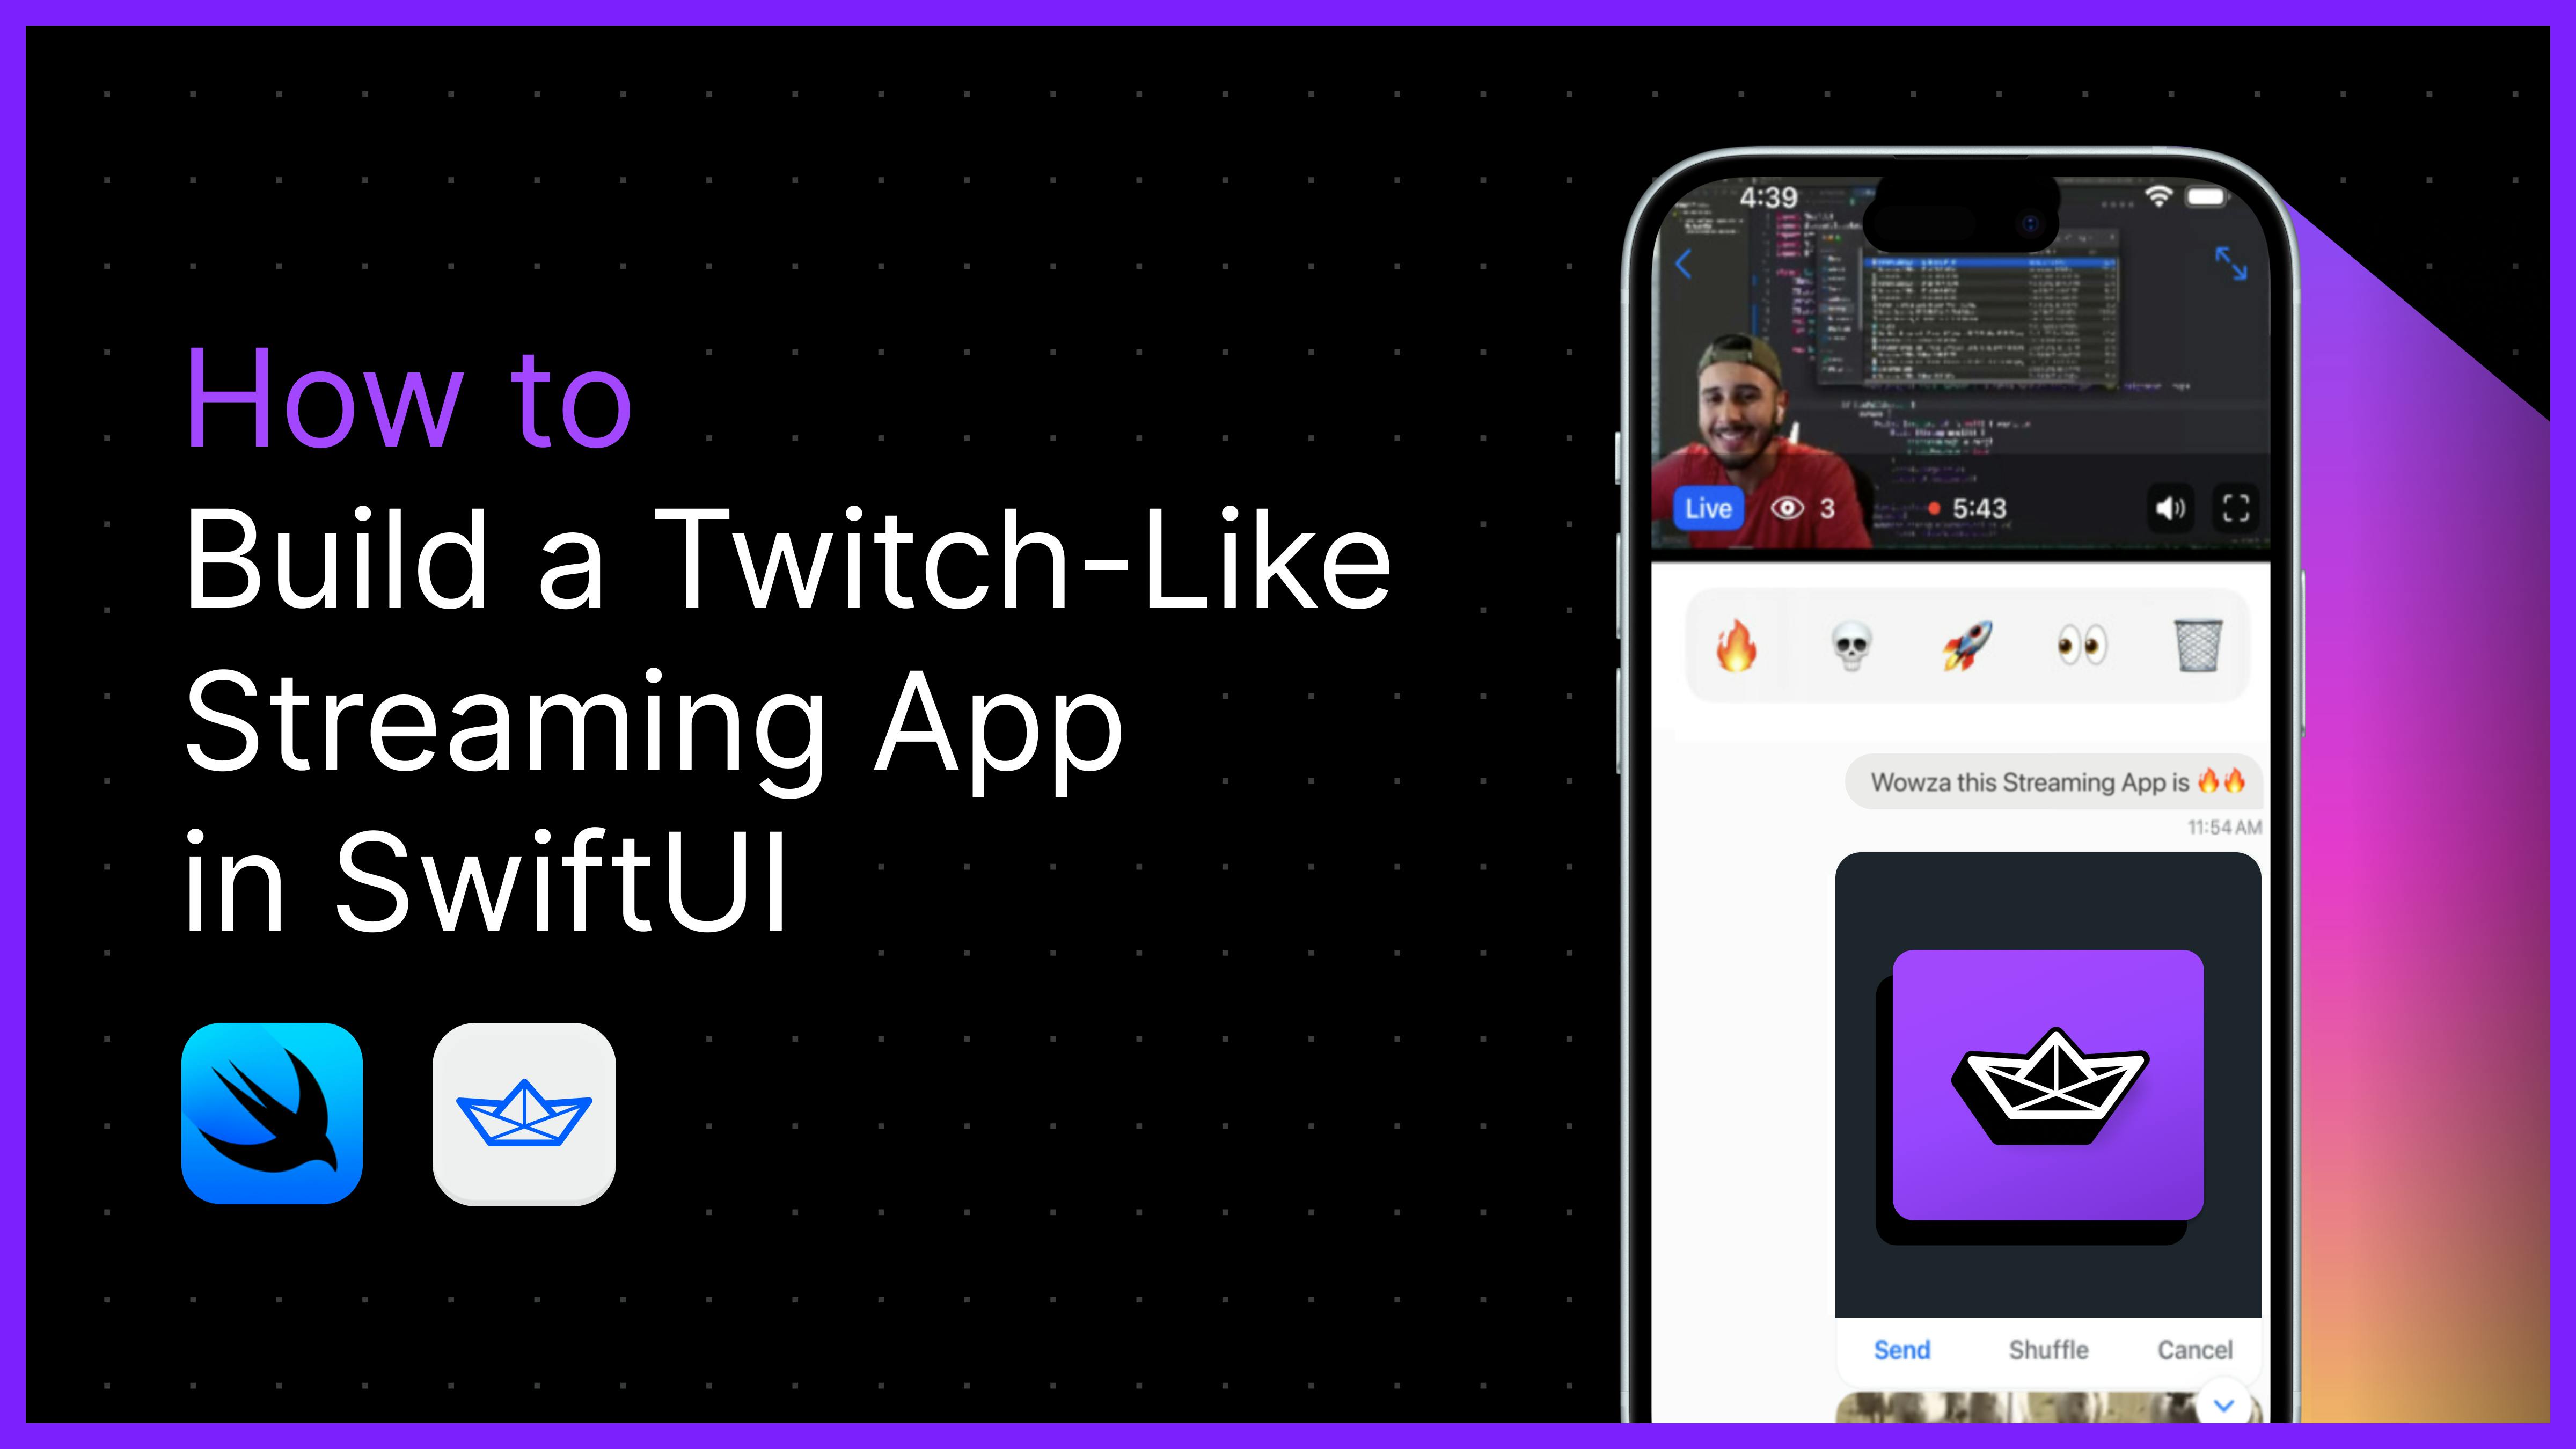 How to Build a Twitch-Like Streaming App in SwiftUI